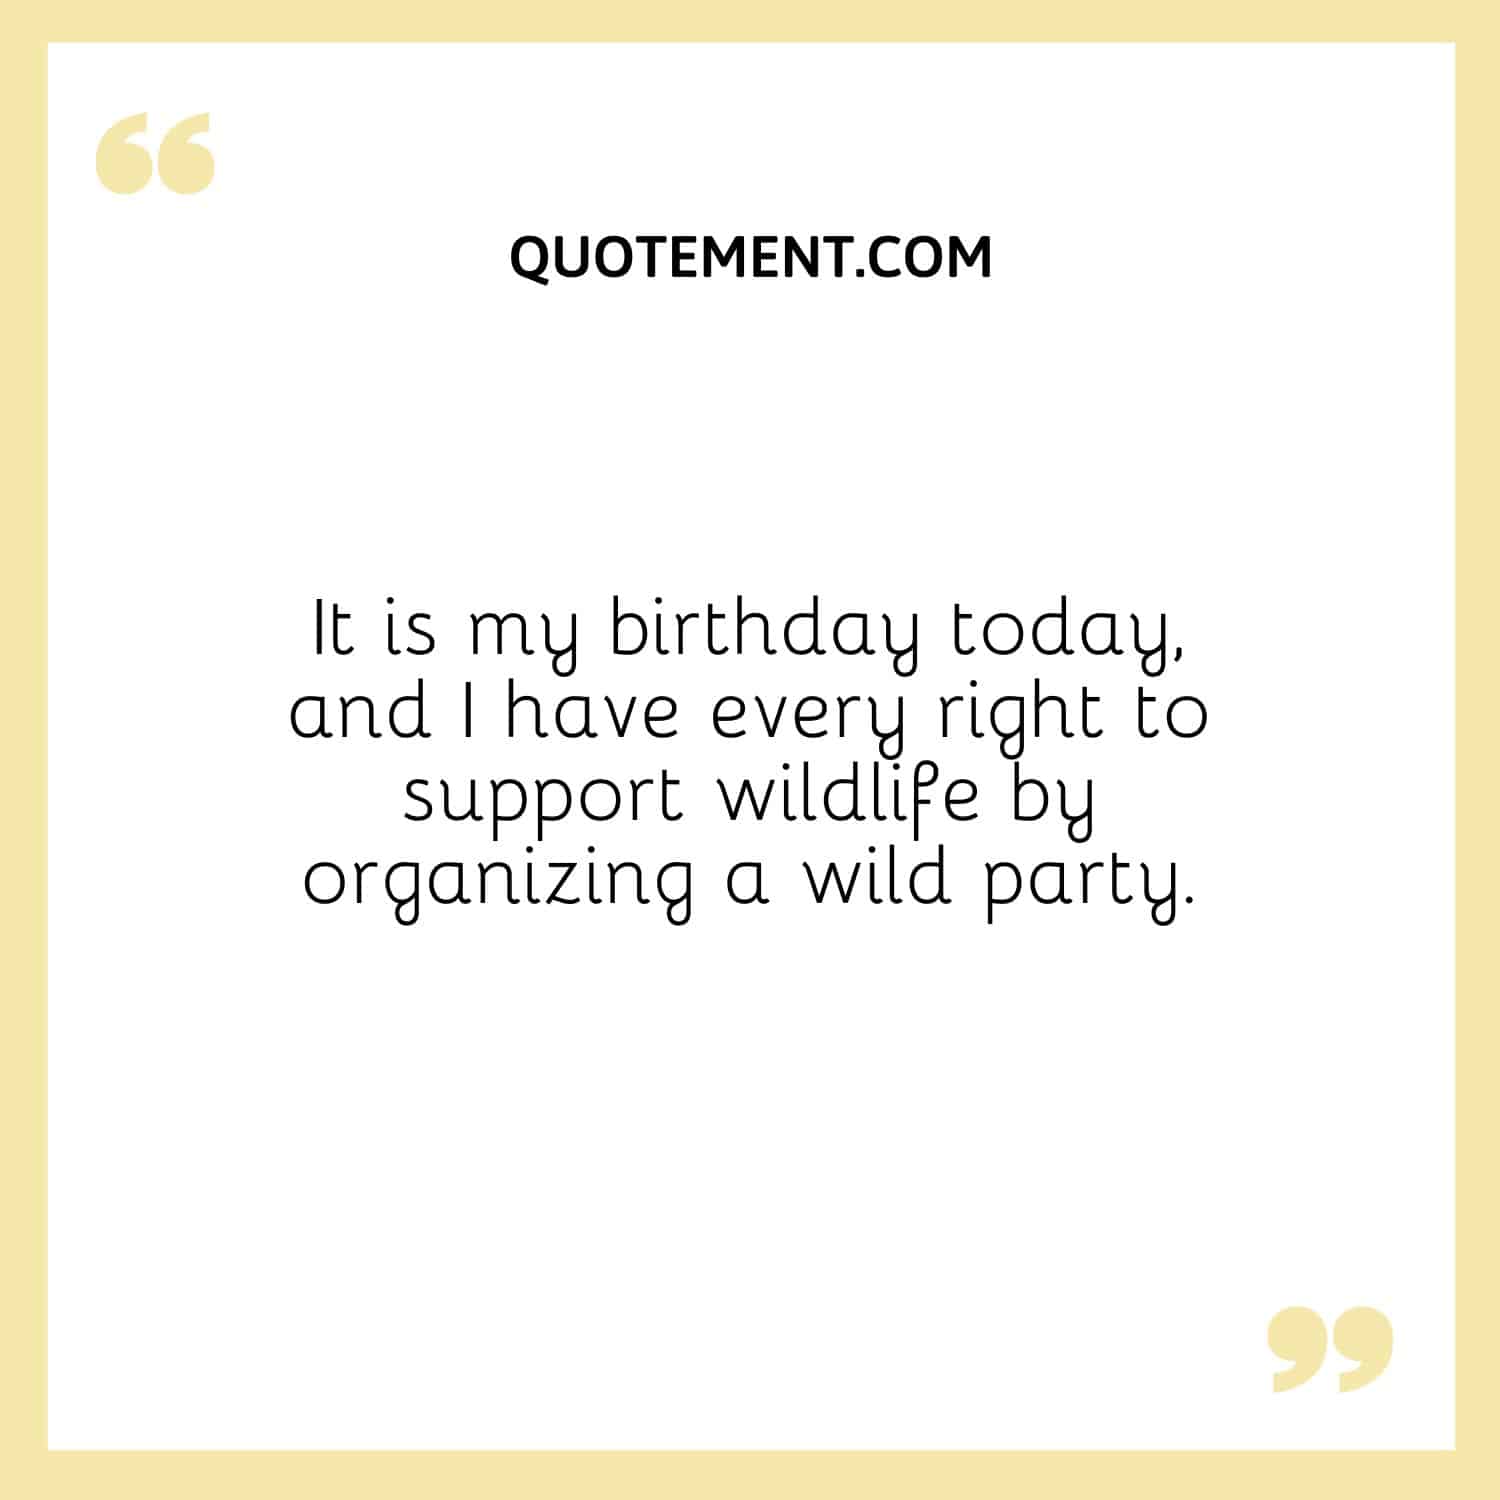 It is my birthday today, and I have every right to support wildlife by organizing a wild party.